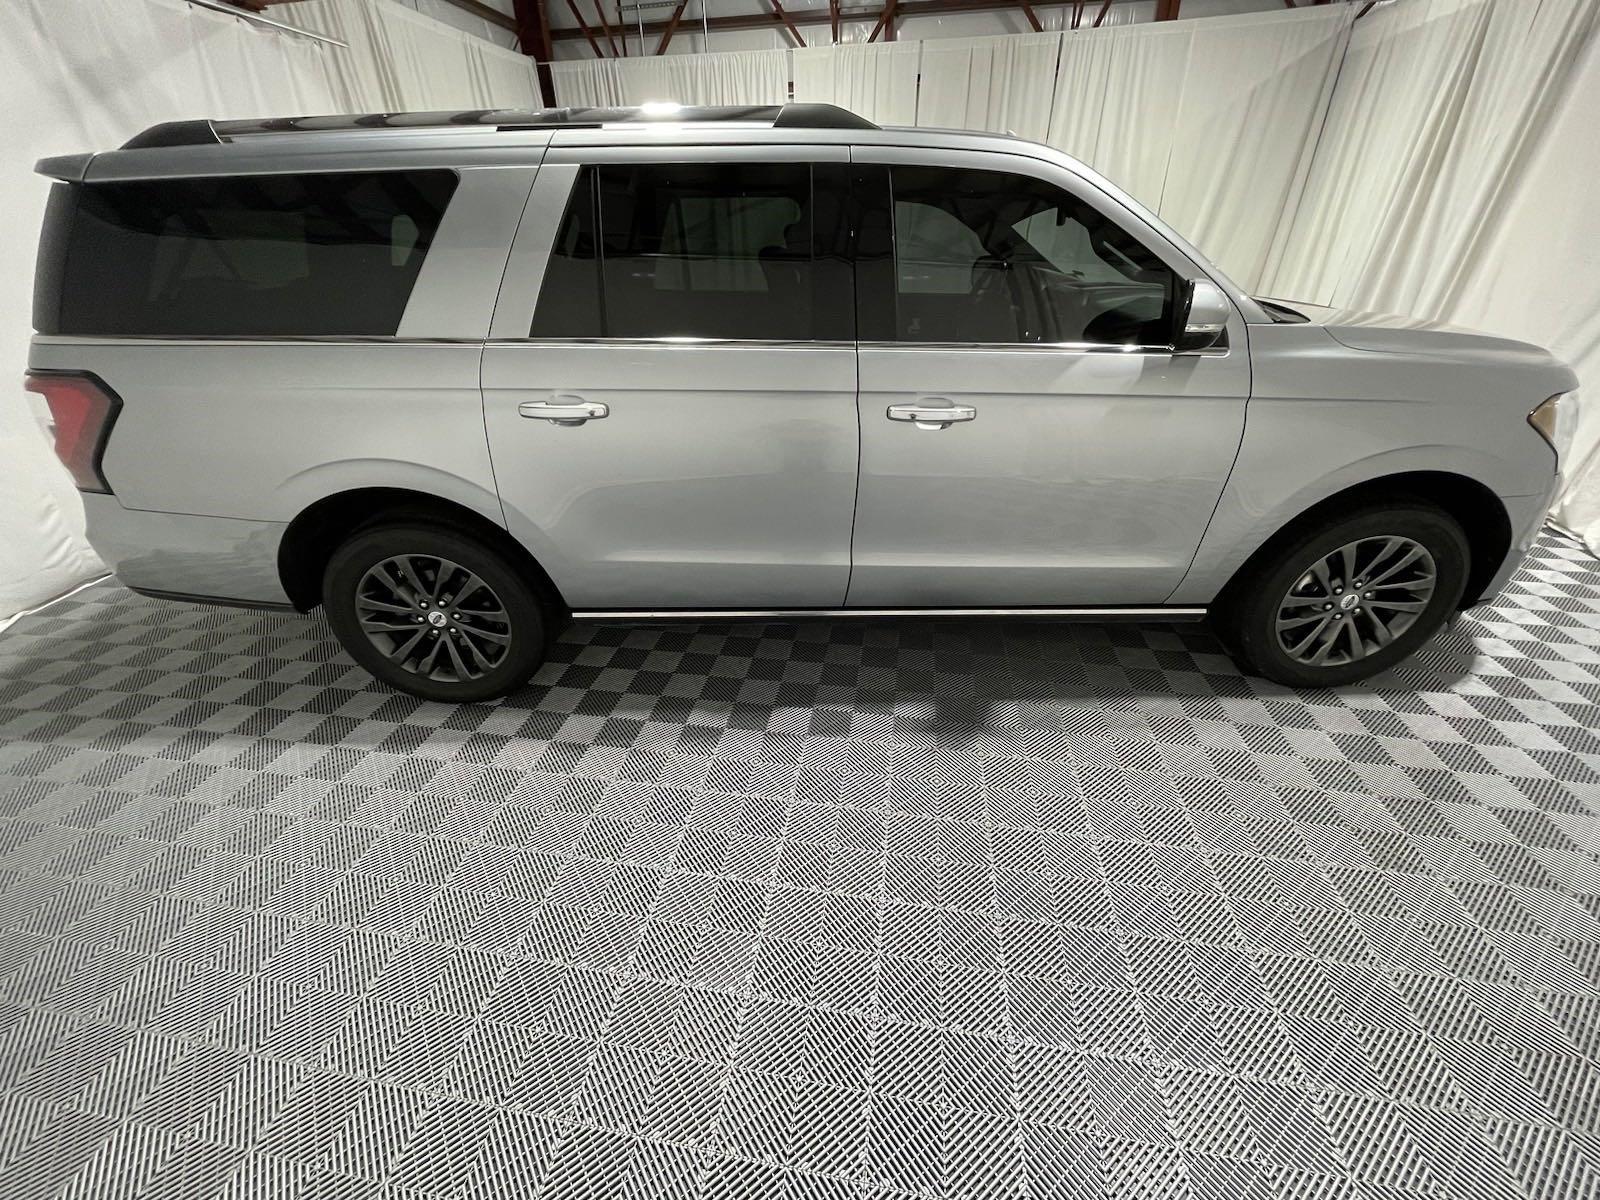 Used 2020 Ford Expedition Max Limited Sport Utility for sale in St Joseph MO